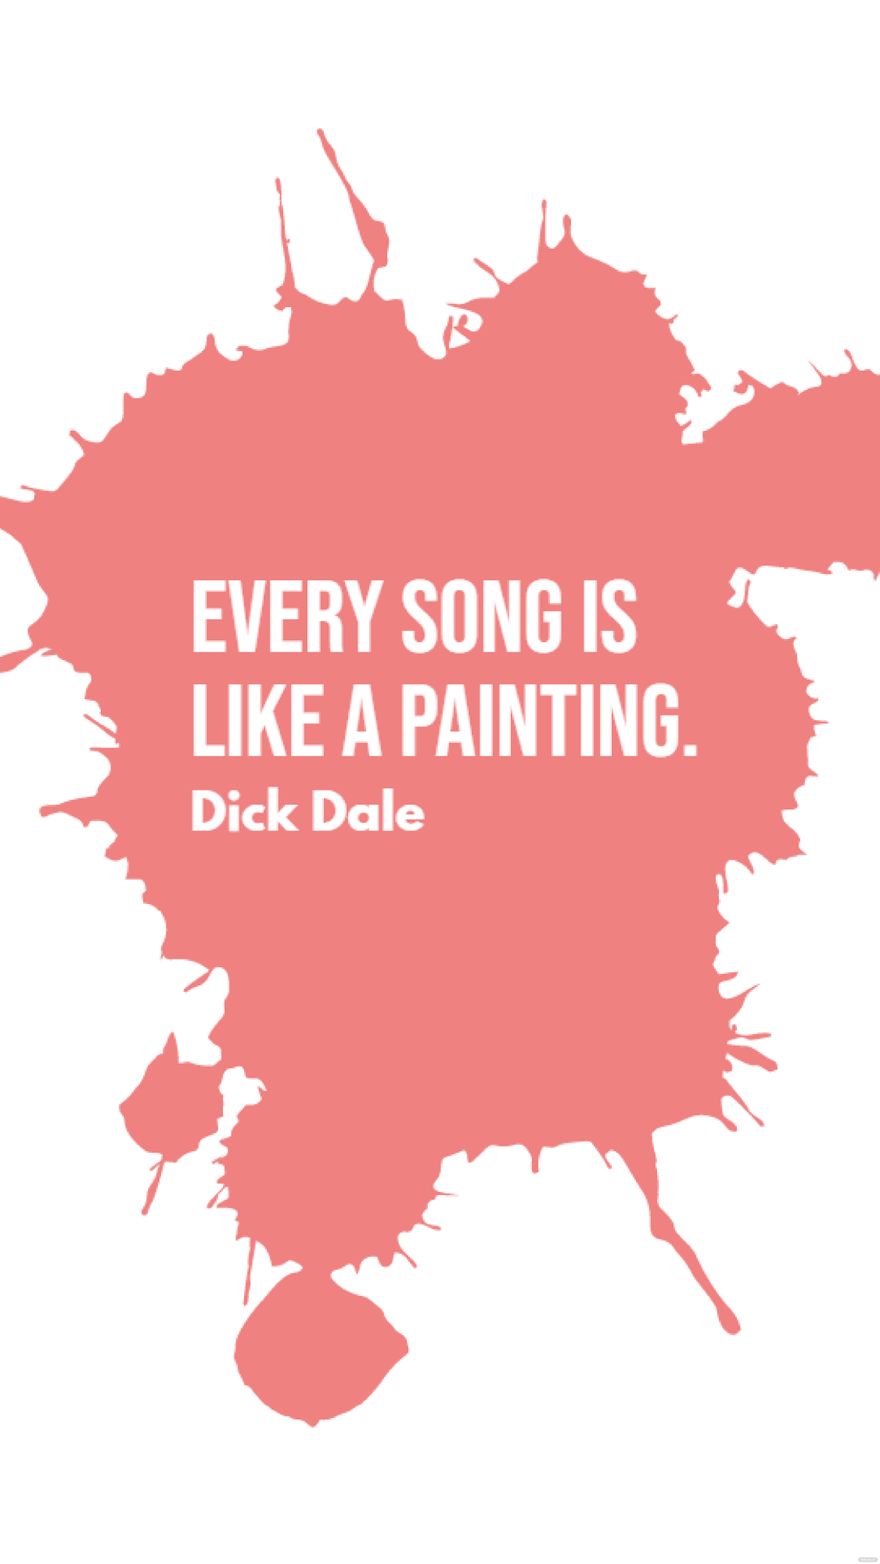 Free Dick Dale - Every song is like a painting. in JPG